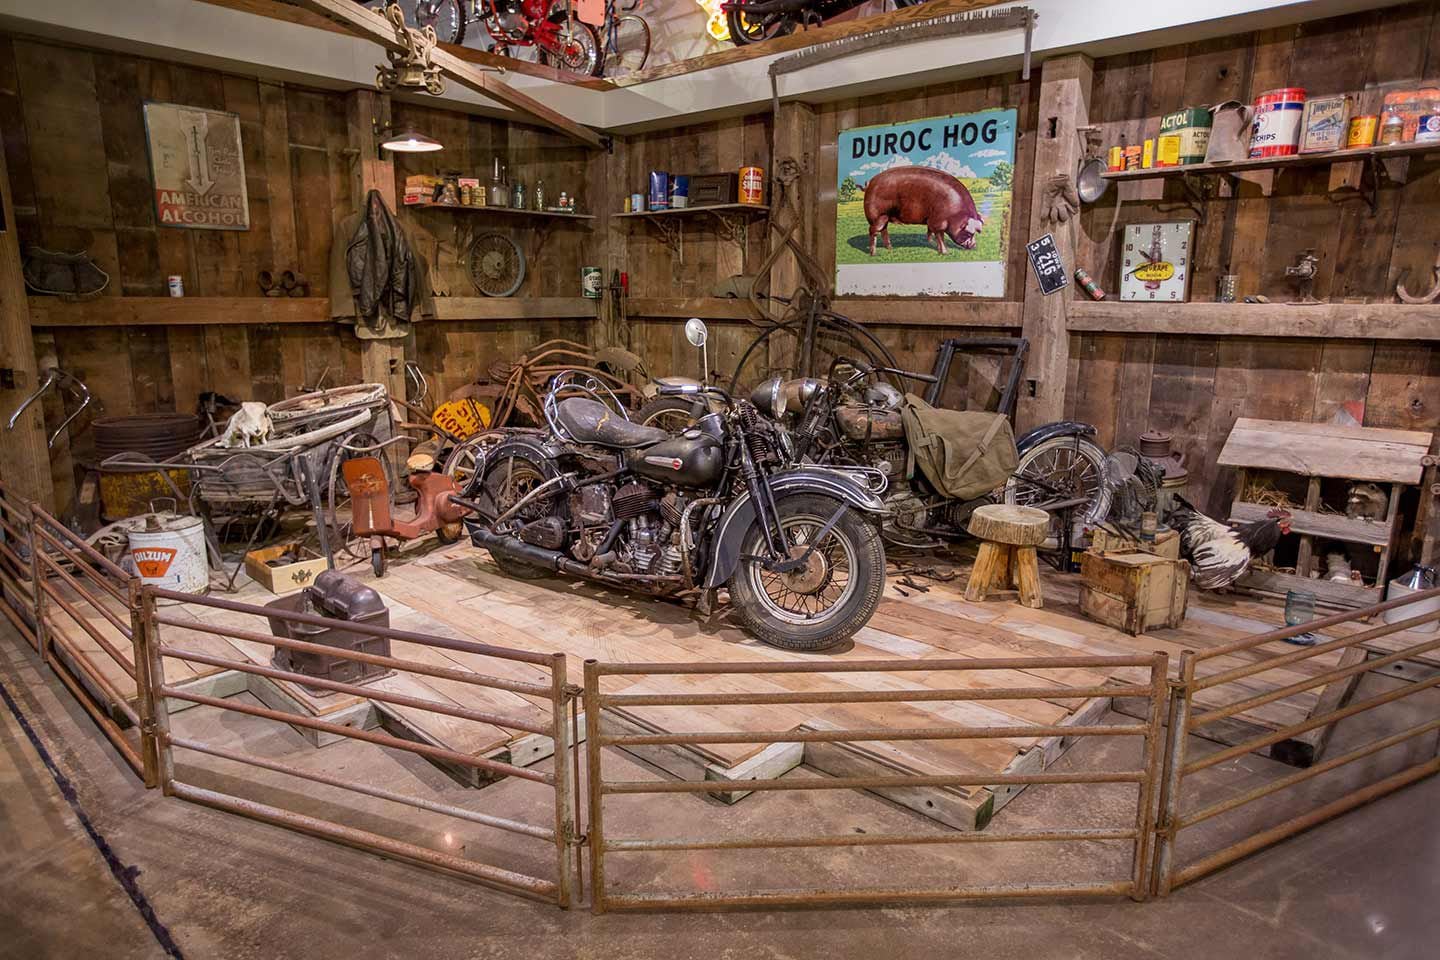 Finding a vintage bike in an old barn is every motorcyclist’s dream, so the National Motorcycle Museum constructed a “Barn Find” area.